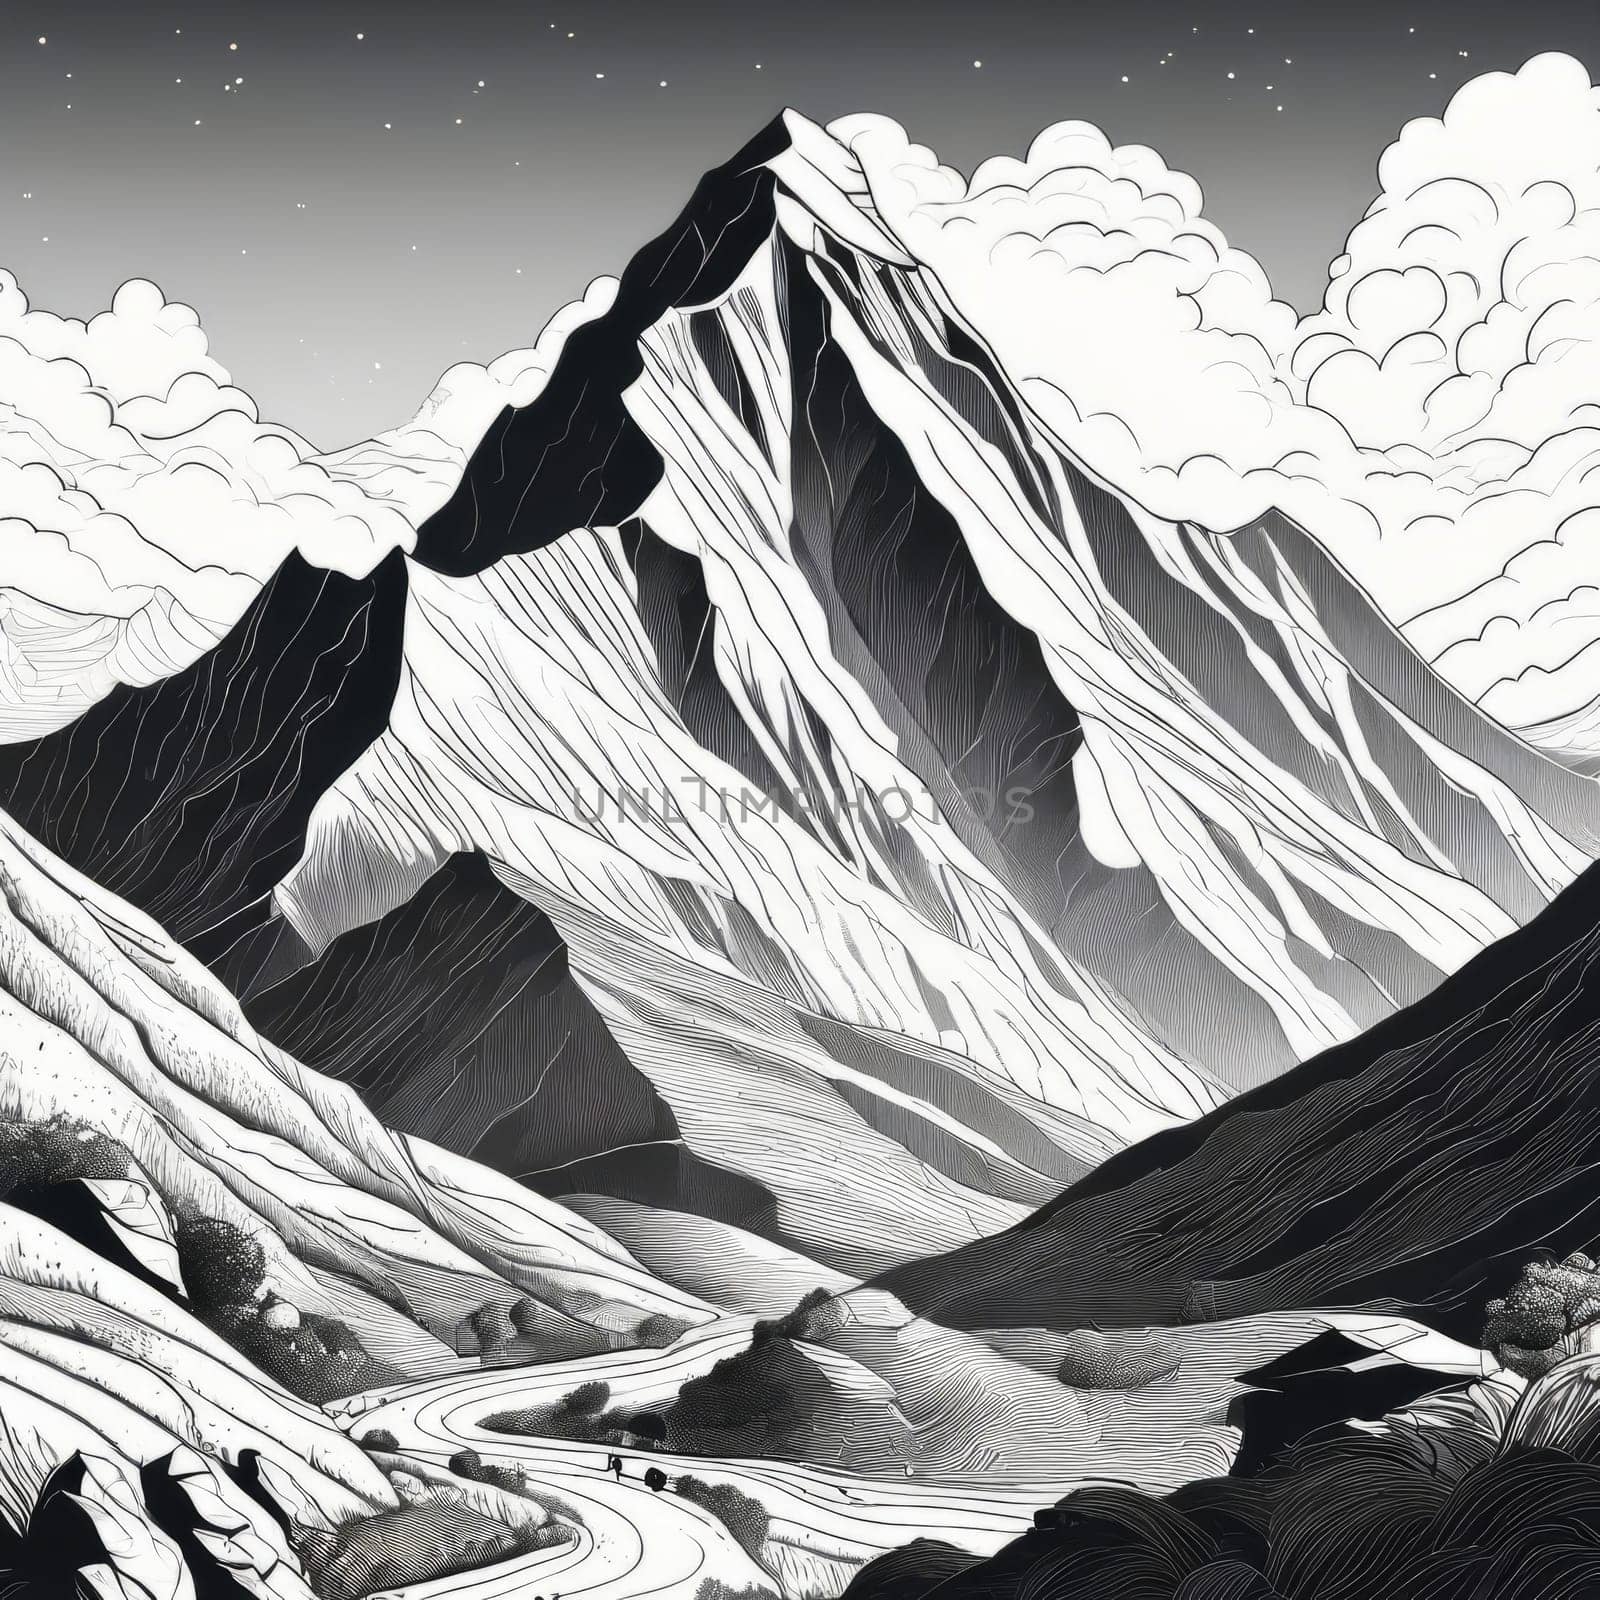 Stunning black, white drawing of majestic mountain range. Nature themed publications, website, travel brochure, meditation app, even as decorative piece in home, offices to evoke sense of tranquility